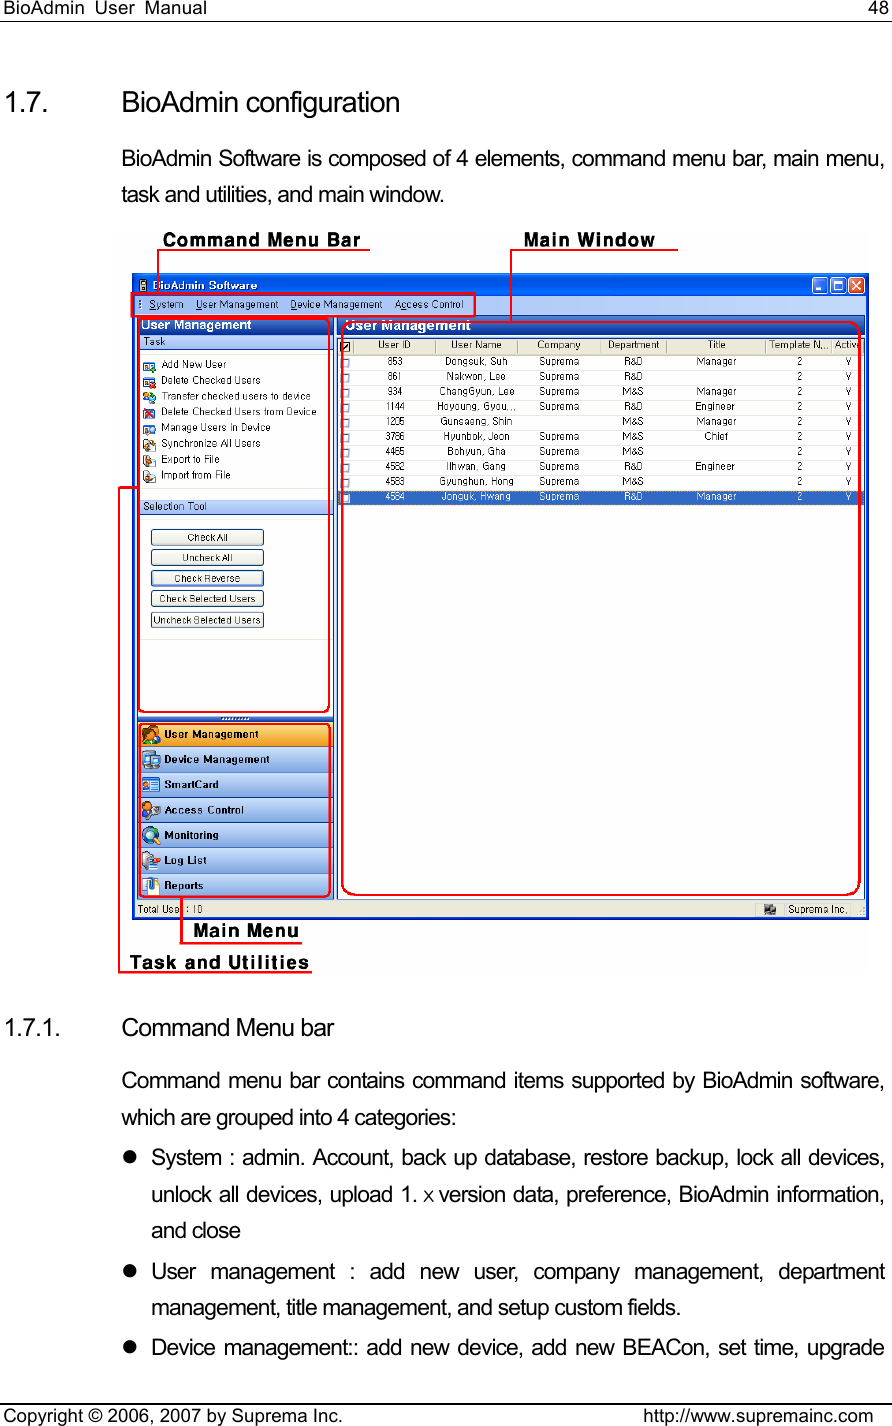 BioAdmin User Manual                                                                     48   Copyright © 2006, 2007 by Suprema Inc.                                http://www.supremainc.com 1.7. BioAdmin configuration BioAdmin Software is composed of 4 elements, command menu bar, main menu, task and utilities, and main window.  1.7.1. Command Menu bar Command menu bar contains command items supported by BioAdmin software, which are grouped into 4 categories: z  System : admin. Account, back up database, restore backup, lock all devices, unlock all devices, upload 1.ⅹversion data, preference, BioAdmin information, and close z User management : add new user, company management, department management, title management, and setup custom fields.   z  Device management:: add new device, add new BEACon, set time, upgrade 